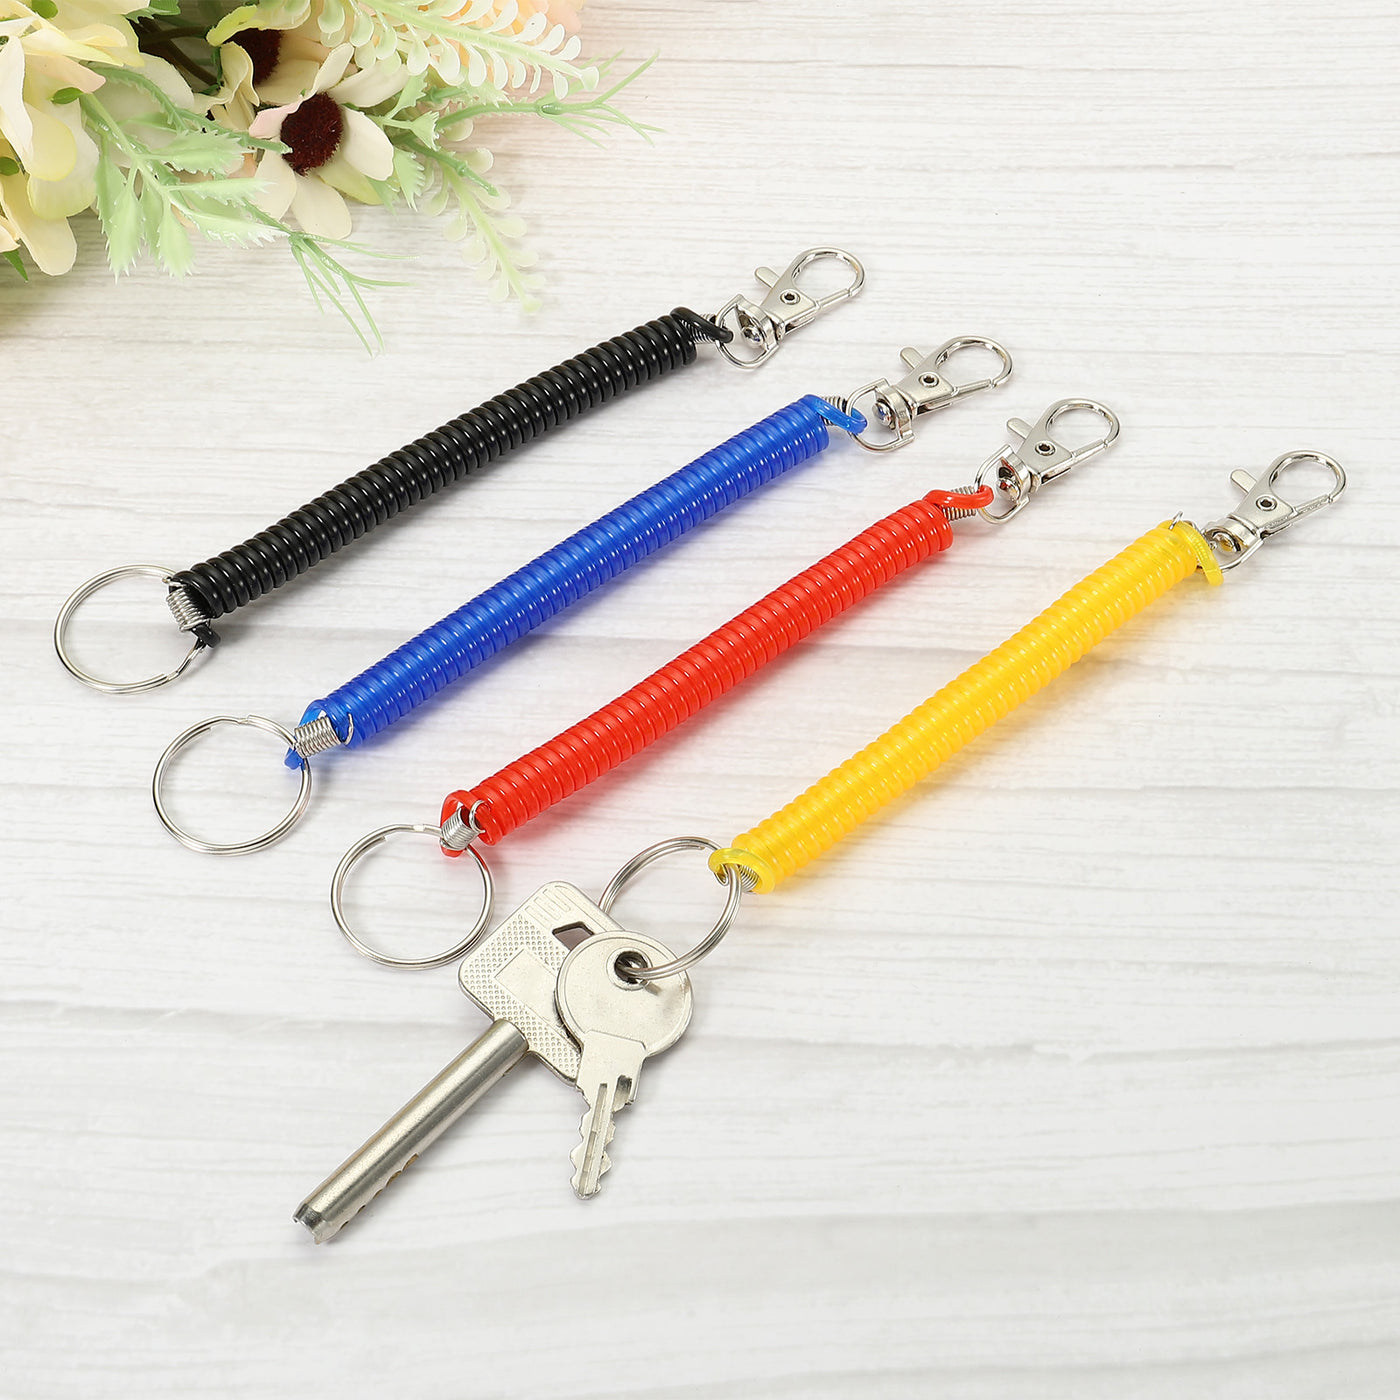 Harfington 6.7" Spiral Retractable Spring Coil Keychain, 4 Pack Stretch Cord Key Ring for Keys Wallet Cellphone, Red Yellow Blue Black